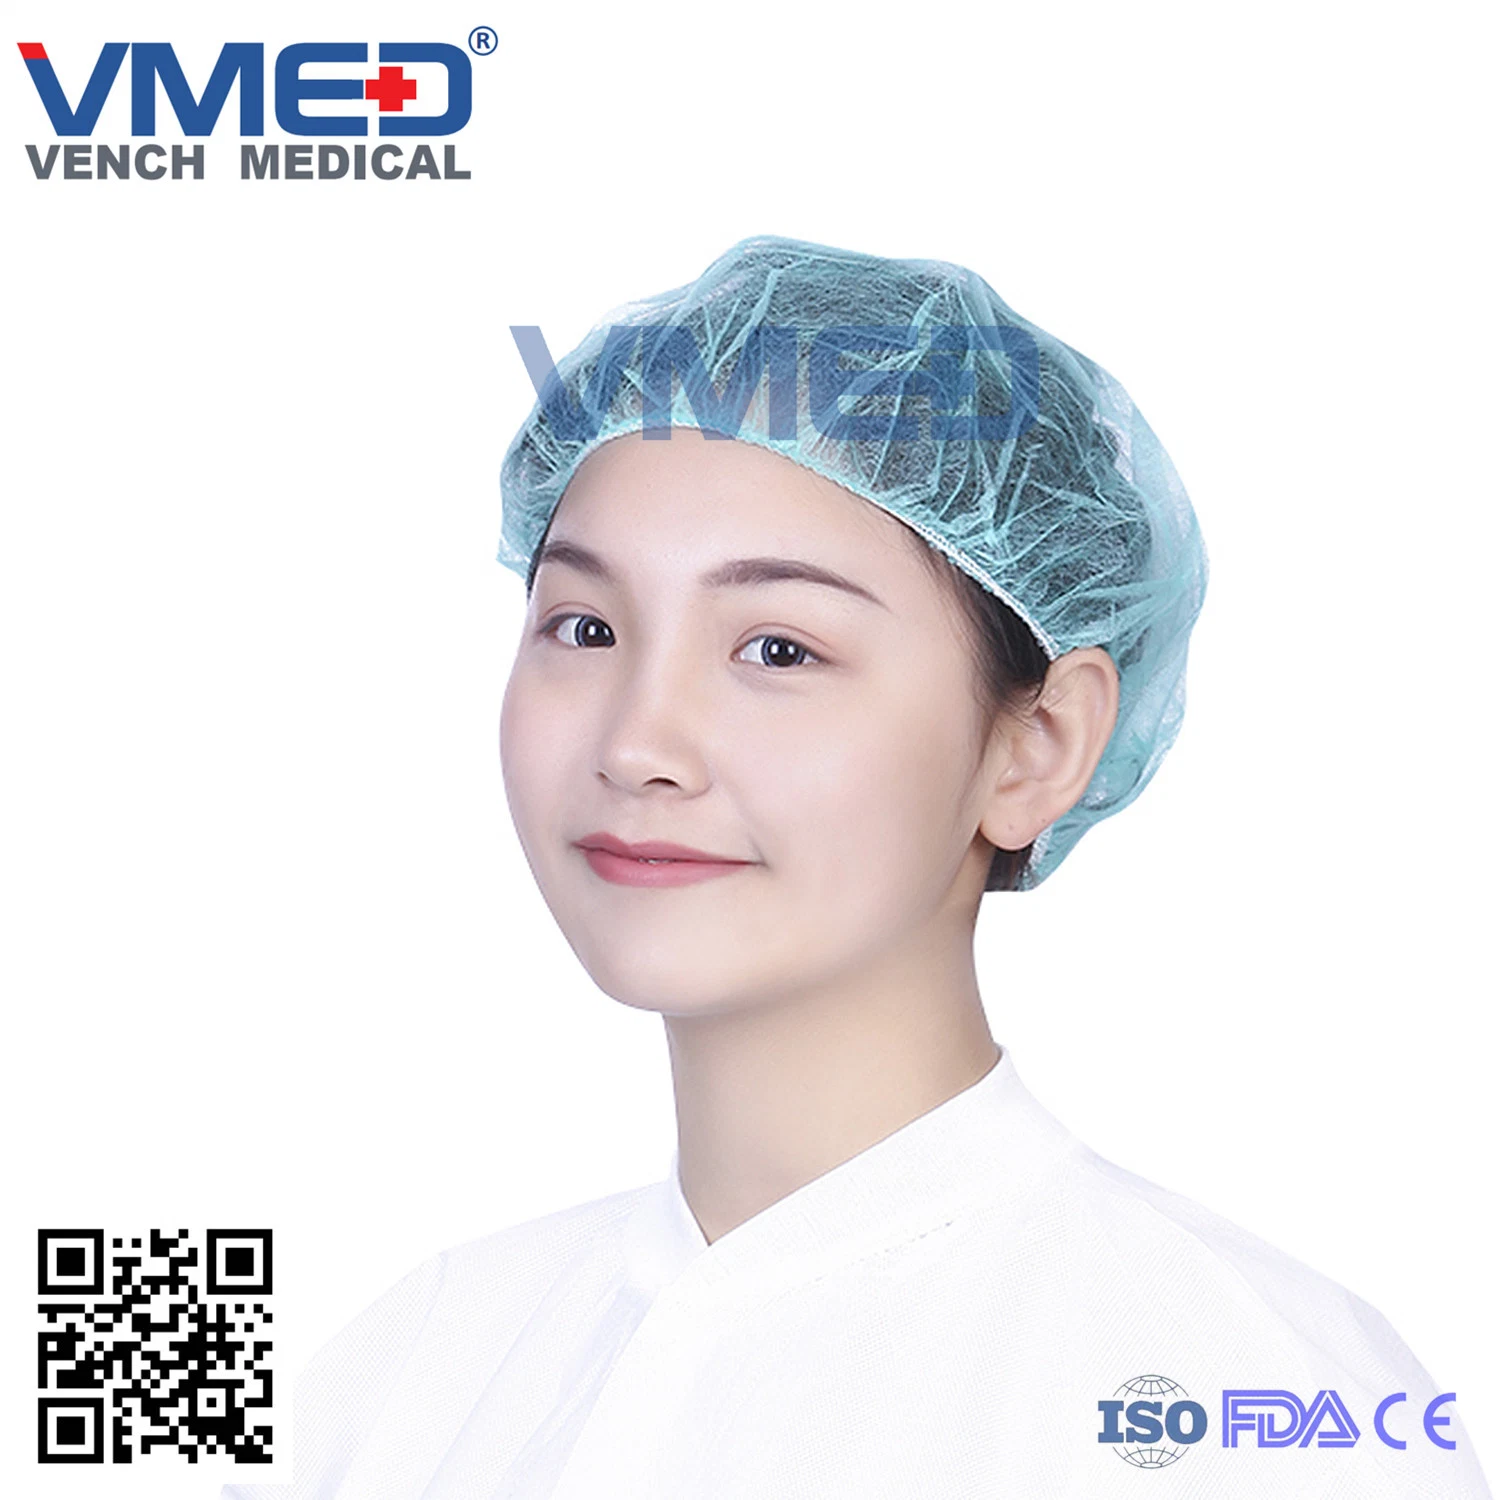 Disposable Nonwoven/PP/ PE/ SMS/ Nurse/ Bouffant/Clip/Crimped/ Pleated/ Doctor/Medical/ Hospital/ Surgical/Round Cap